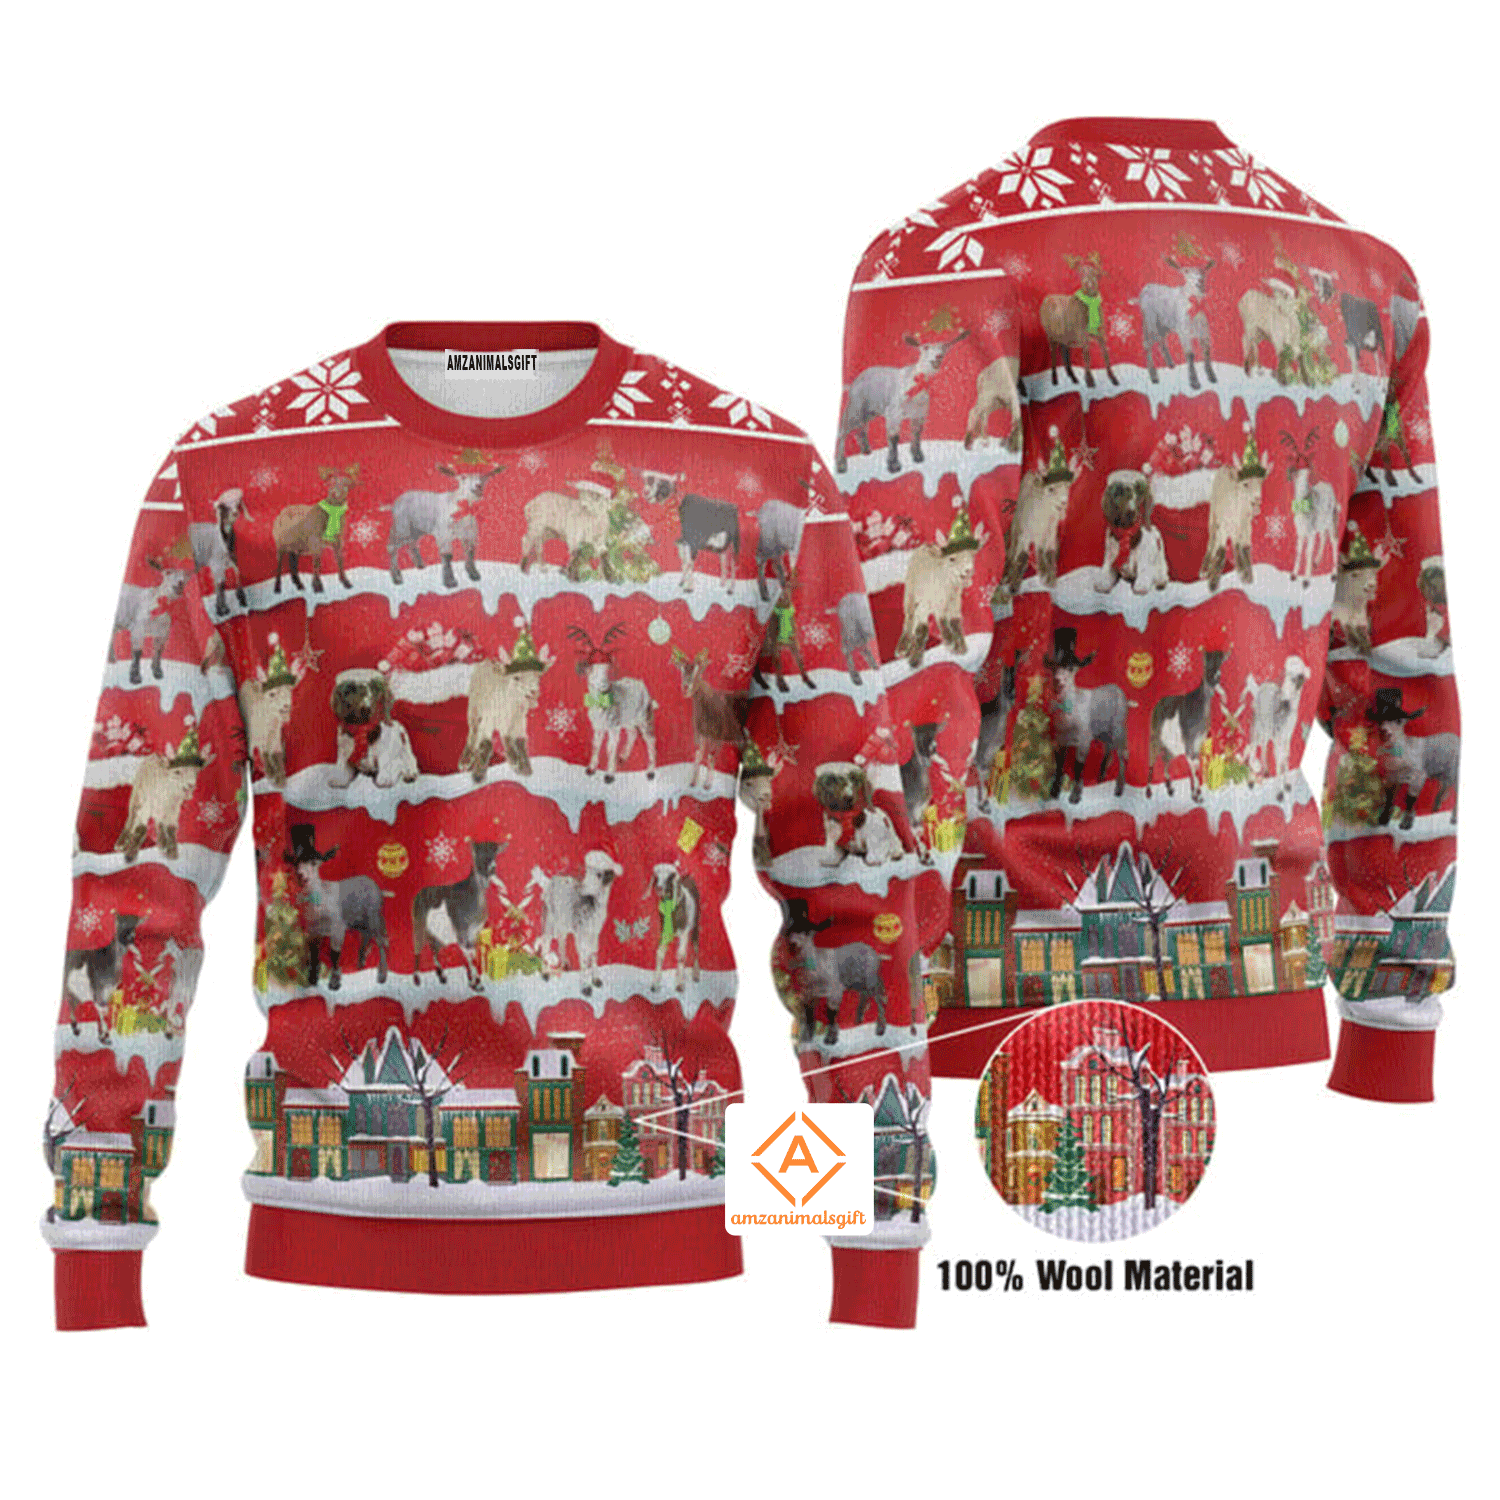 Goat Christmas Night Sweater, Ugly Sweater For Men & Women, Perfect Outfit For Christmas New Year Autumn Winter